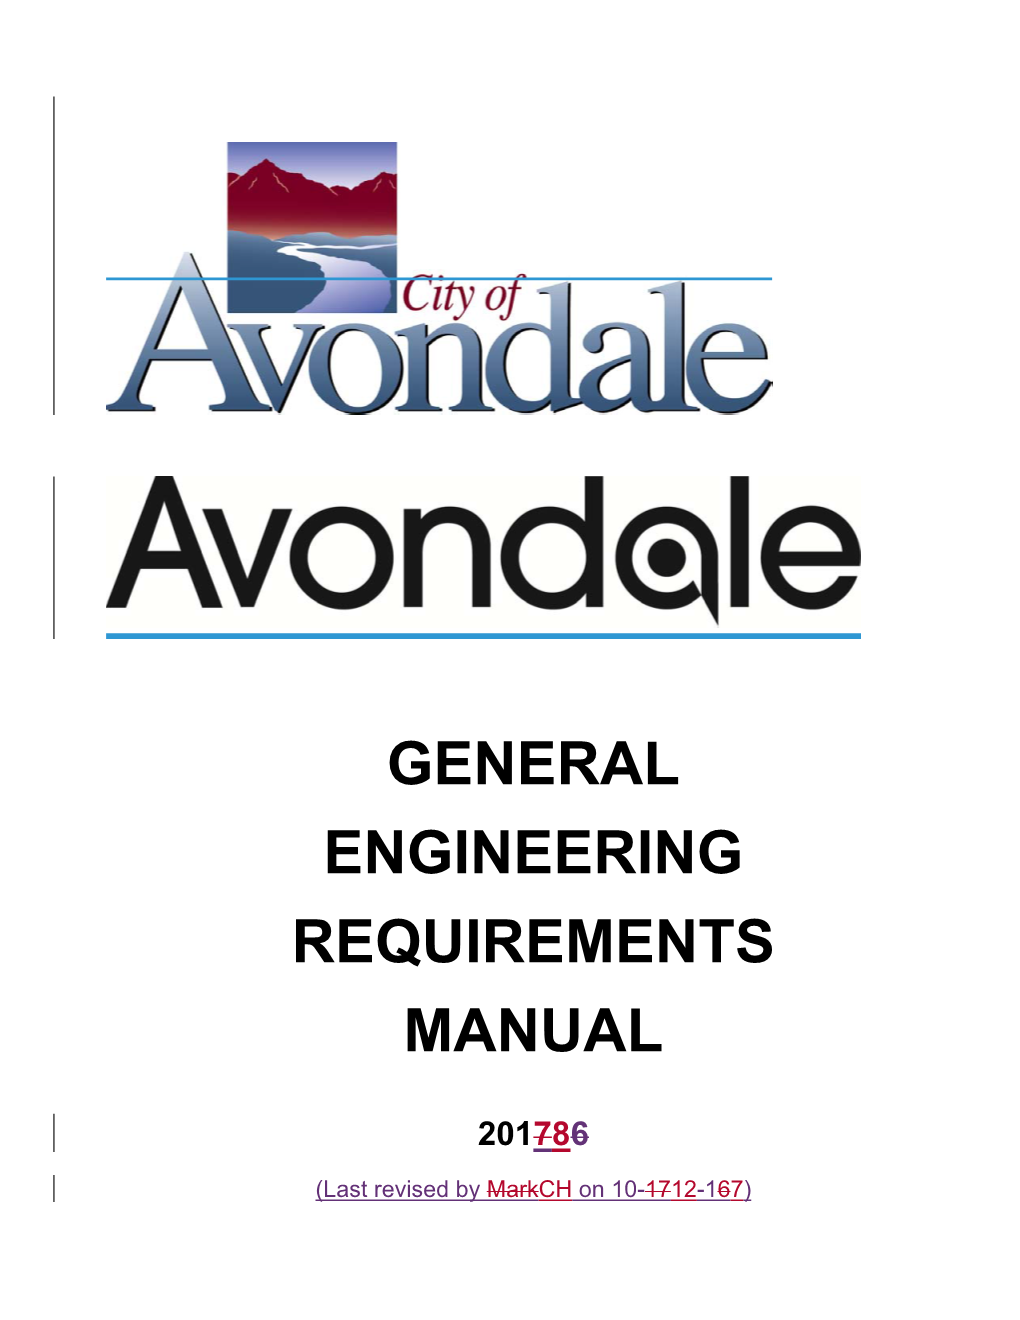 General Engineering Requirements Manual